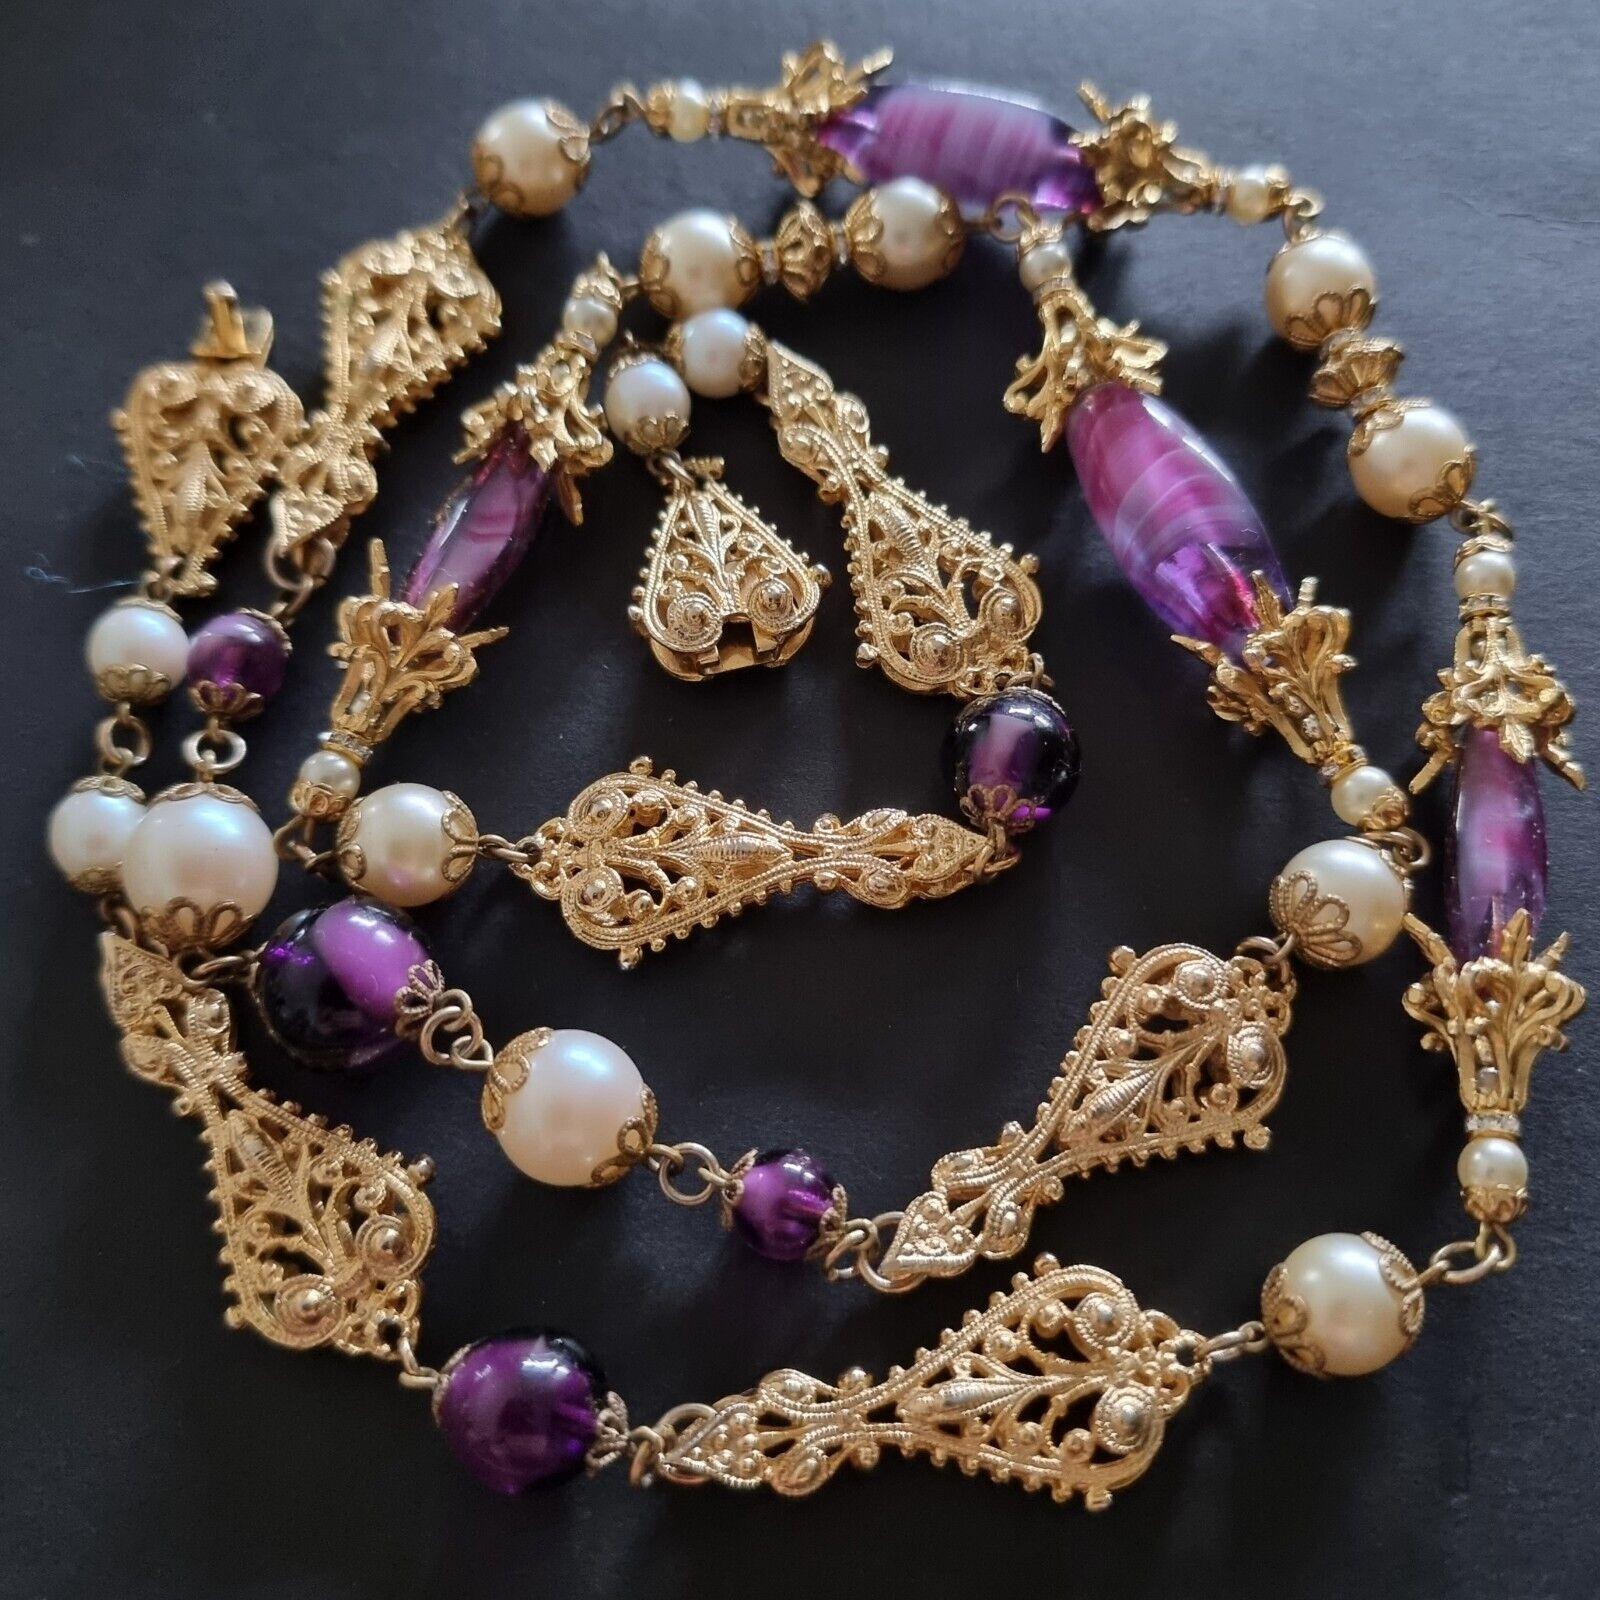 Beautiful old NECKLACE,
50s vintage,
by High Fashion designer Robert GOOSSENS,
length 94 cm, weight 84 g,
extraordinary work, exceptional quality,
golden metal, glass beads,
good condition.

Robert Goossens was born in 1927 in Paris. His mother is